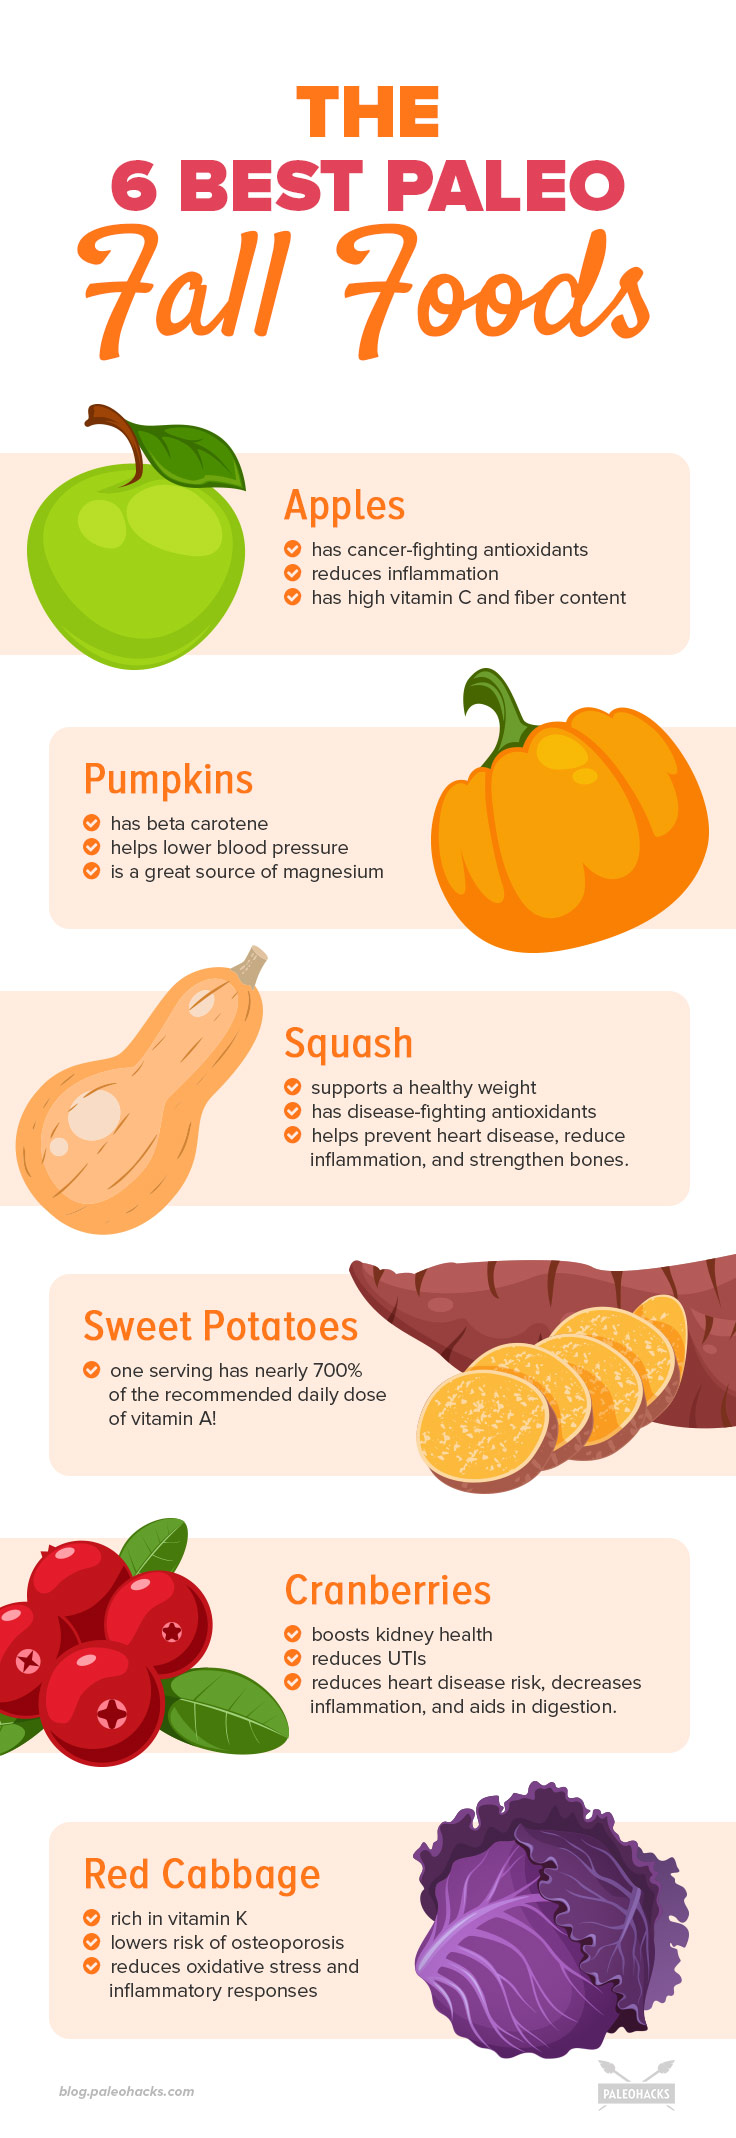 If you love crisp autumn days as much as I do, you'll definitely want to dig into this list of the healthiest fall foods.